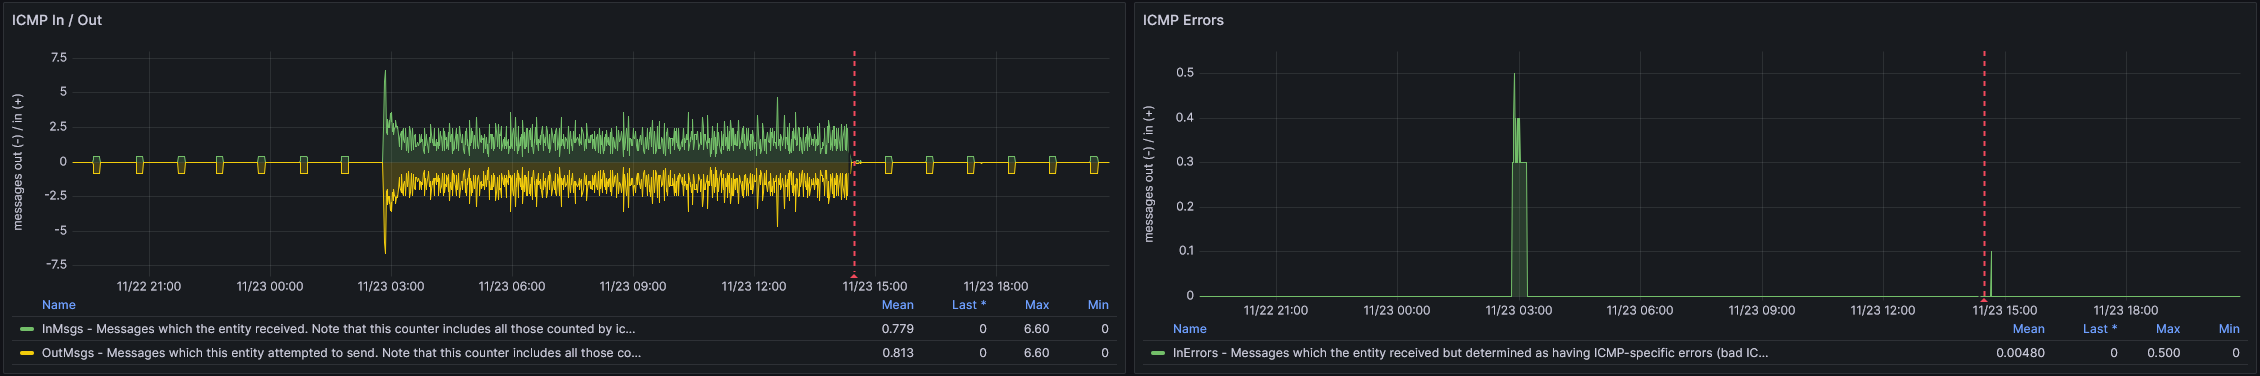 Two graphs side-by-side, the first showing ICMP in/out which is regular before the issue and then going ham during the downtime, and the second showing a spike in ICMP errors localised to the start of the downtime.